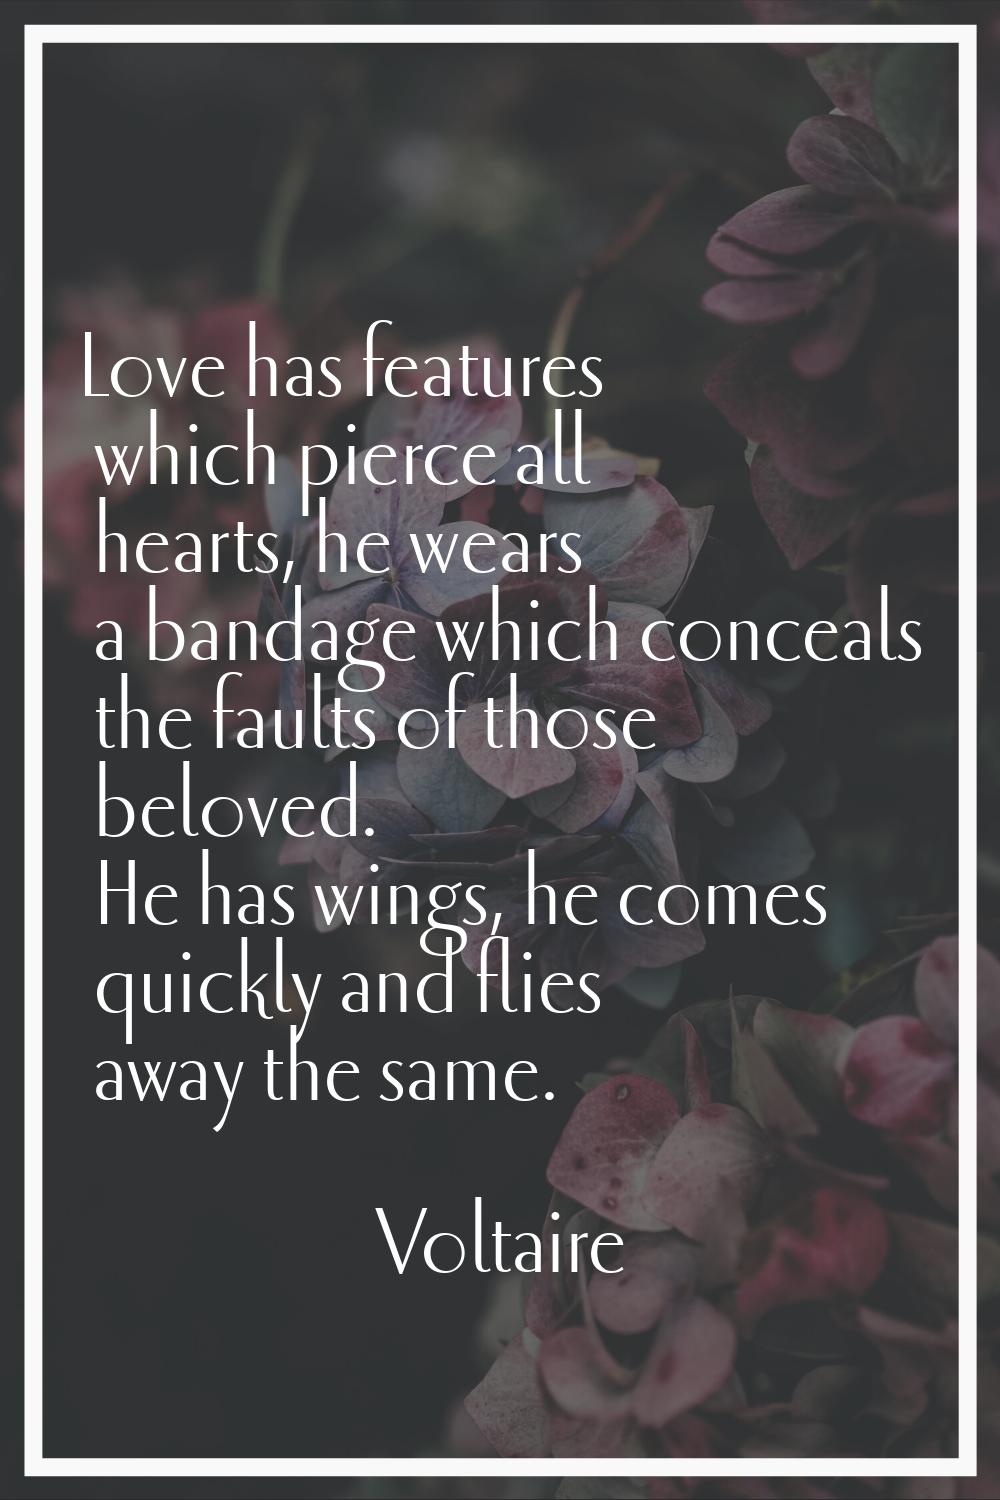 Love has features which pierce all hearts, he wears a bandage which conceals the faults of those be